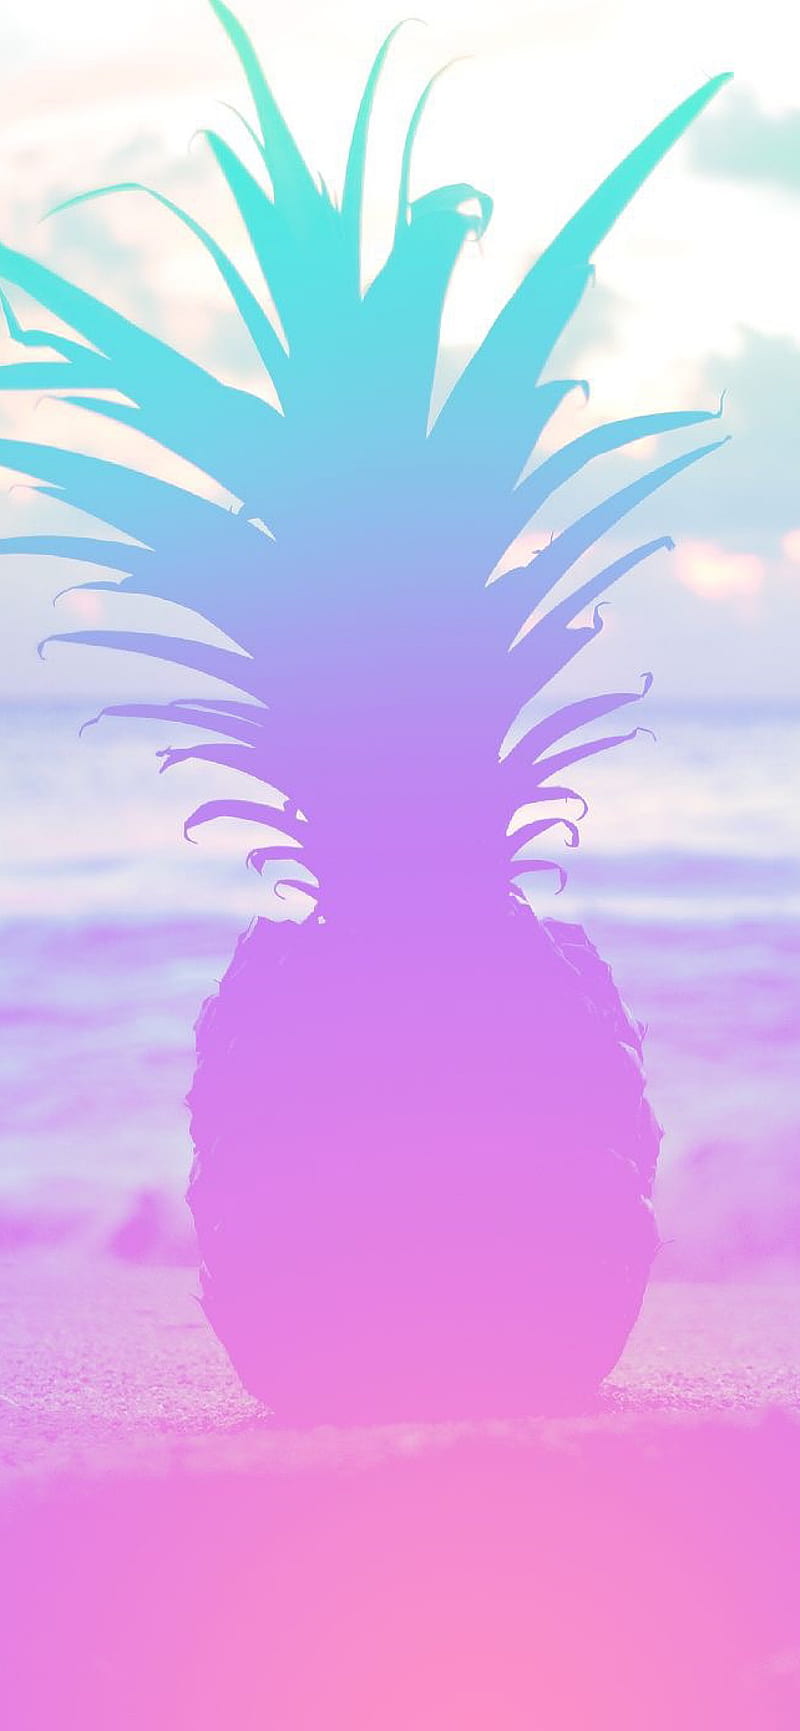 Download Enjoy a pastel summer with the sunkissed beach Wallpaper   Wallpaperscom